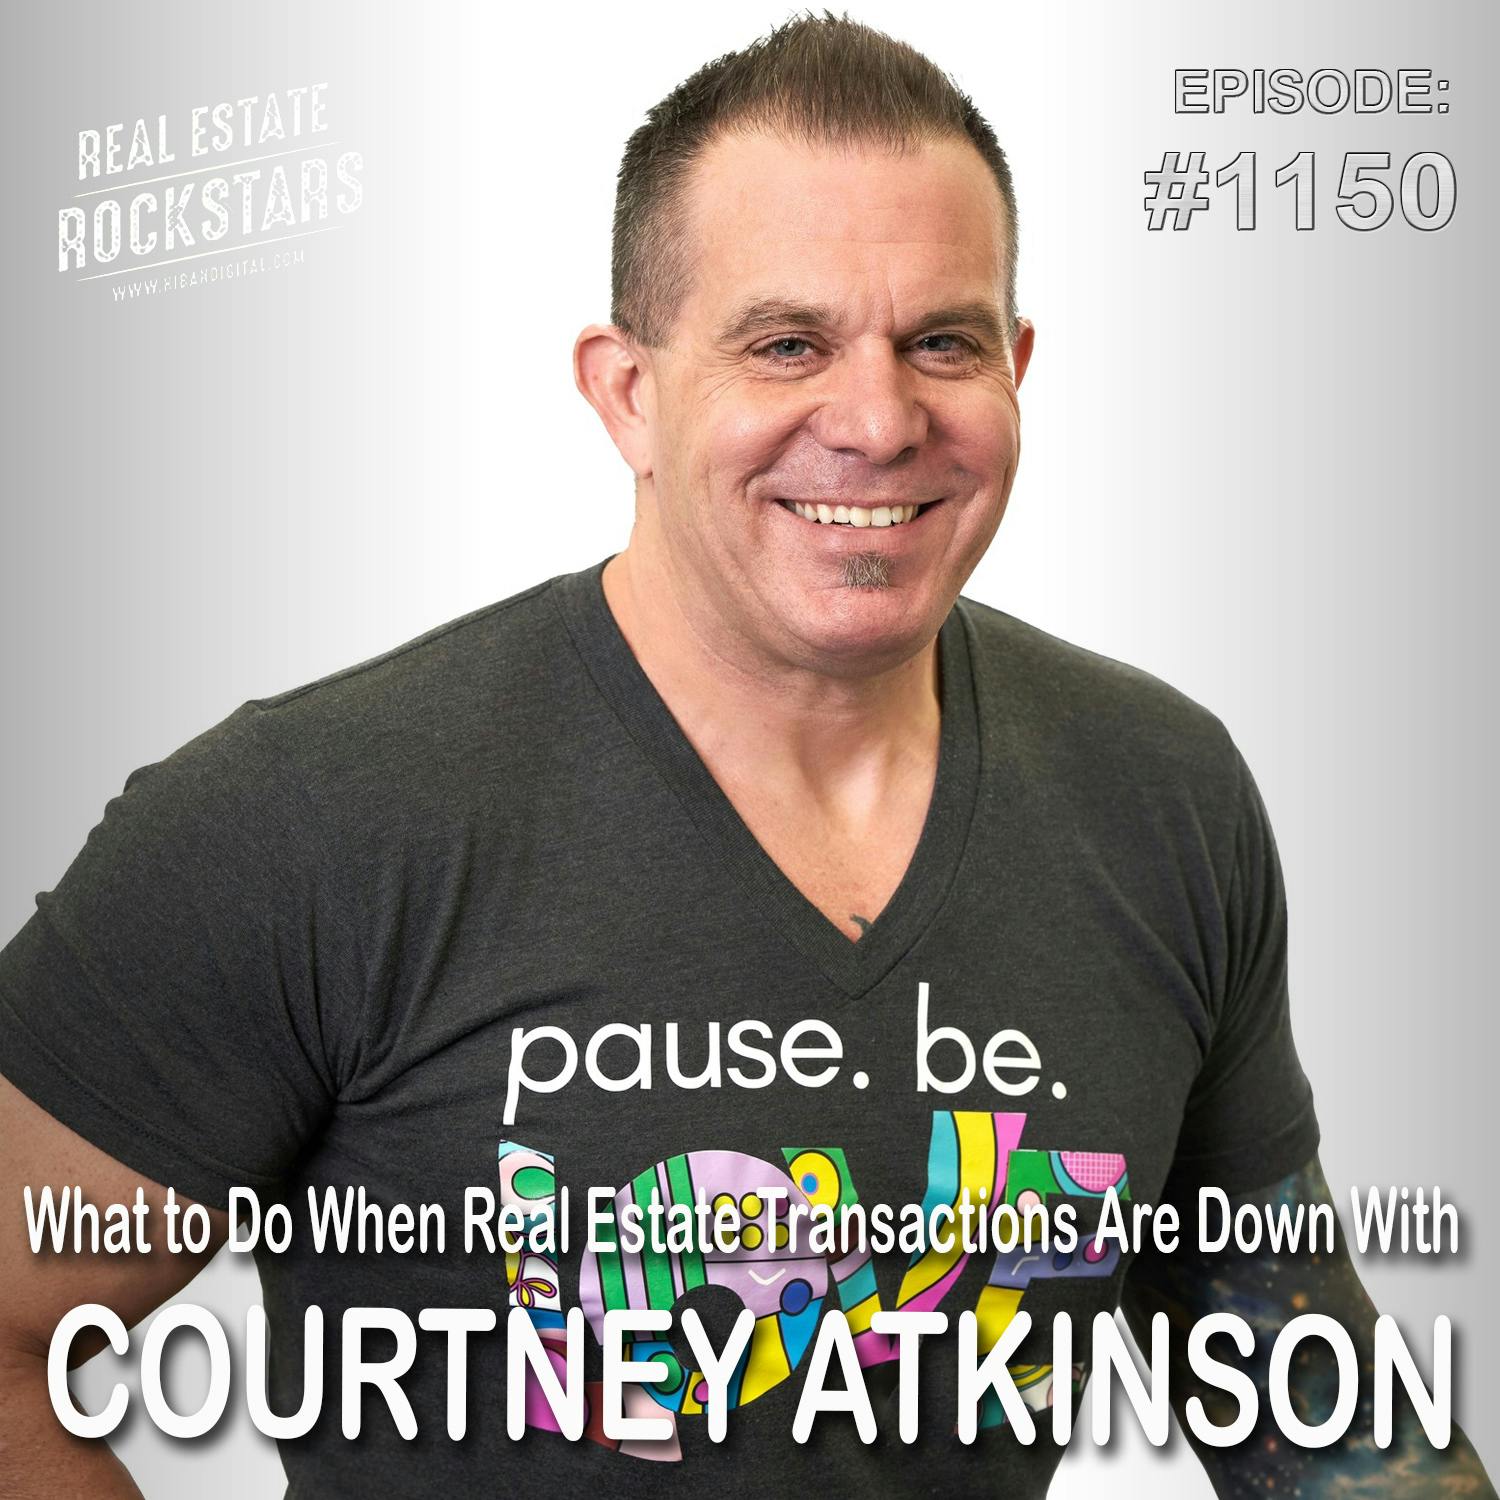 1150: What to Do When Real Estate Transactions Are Down With Courtney Atkinson